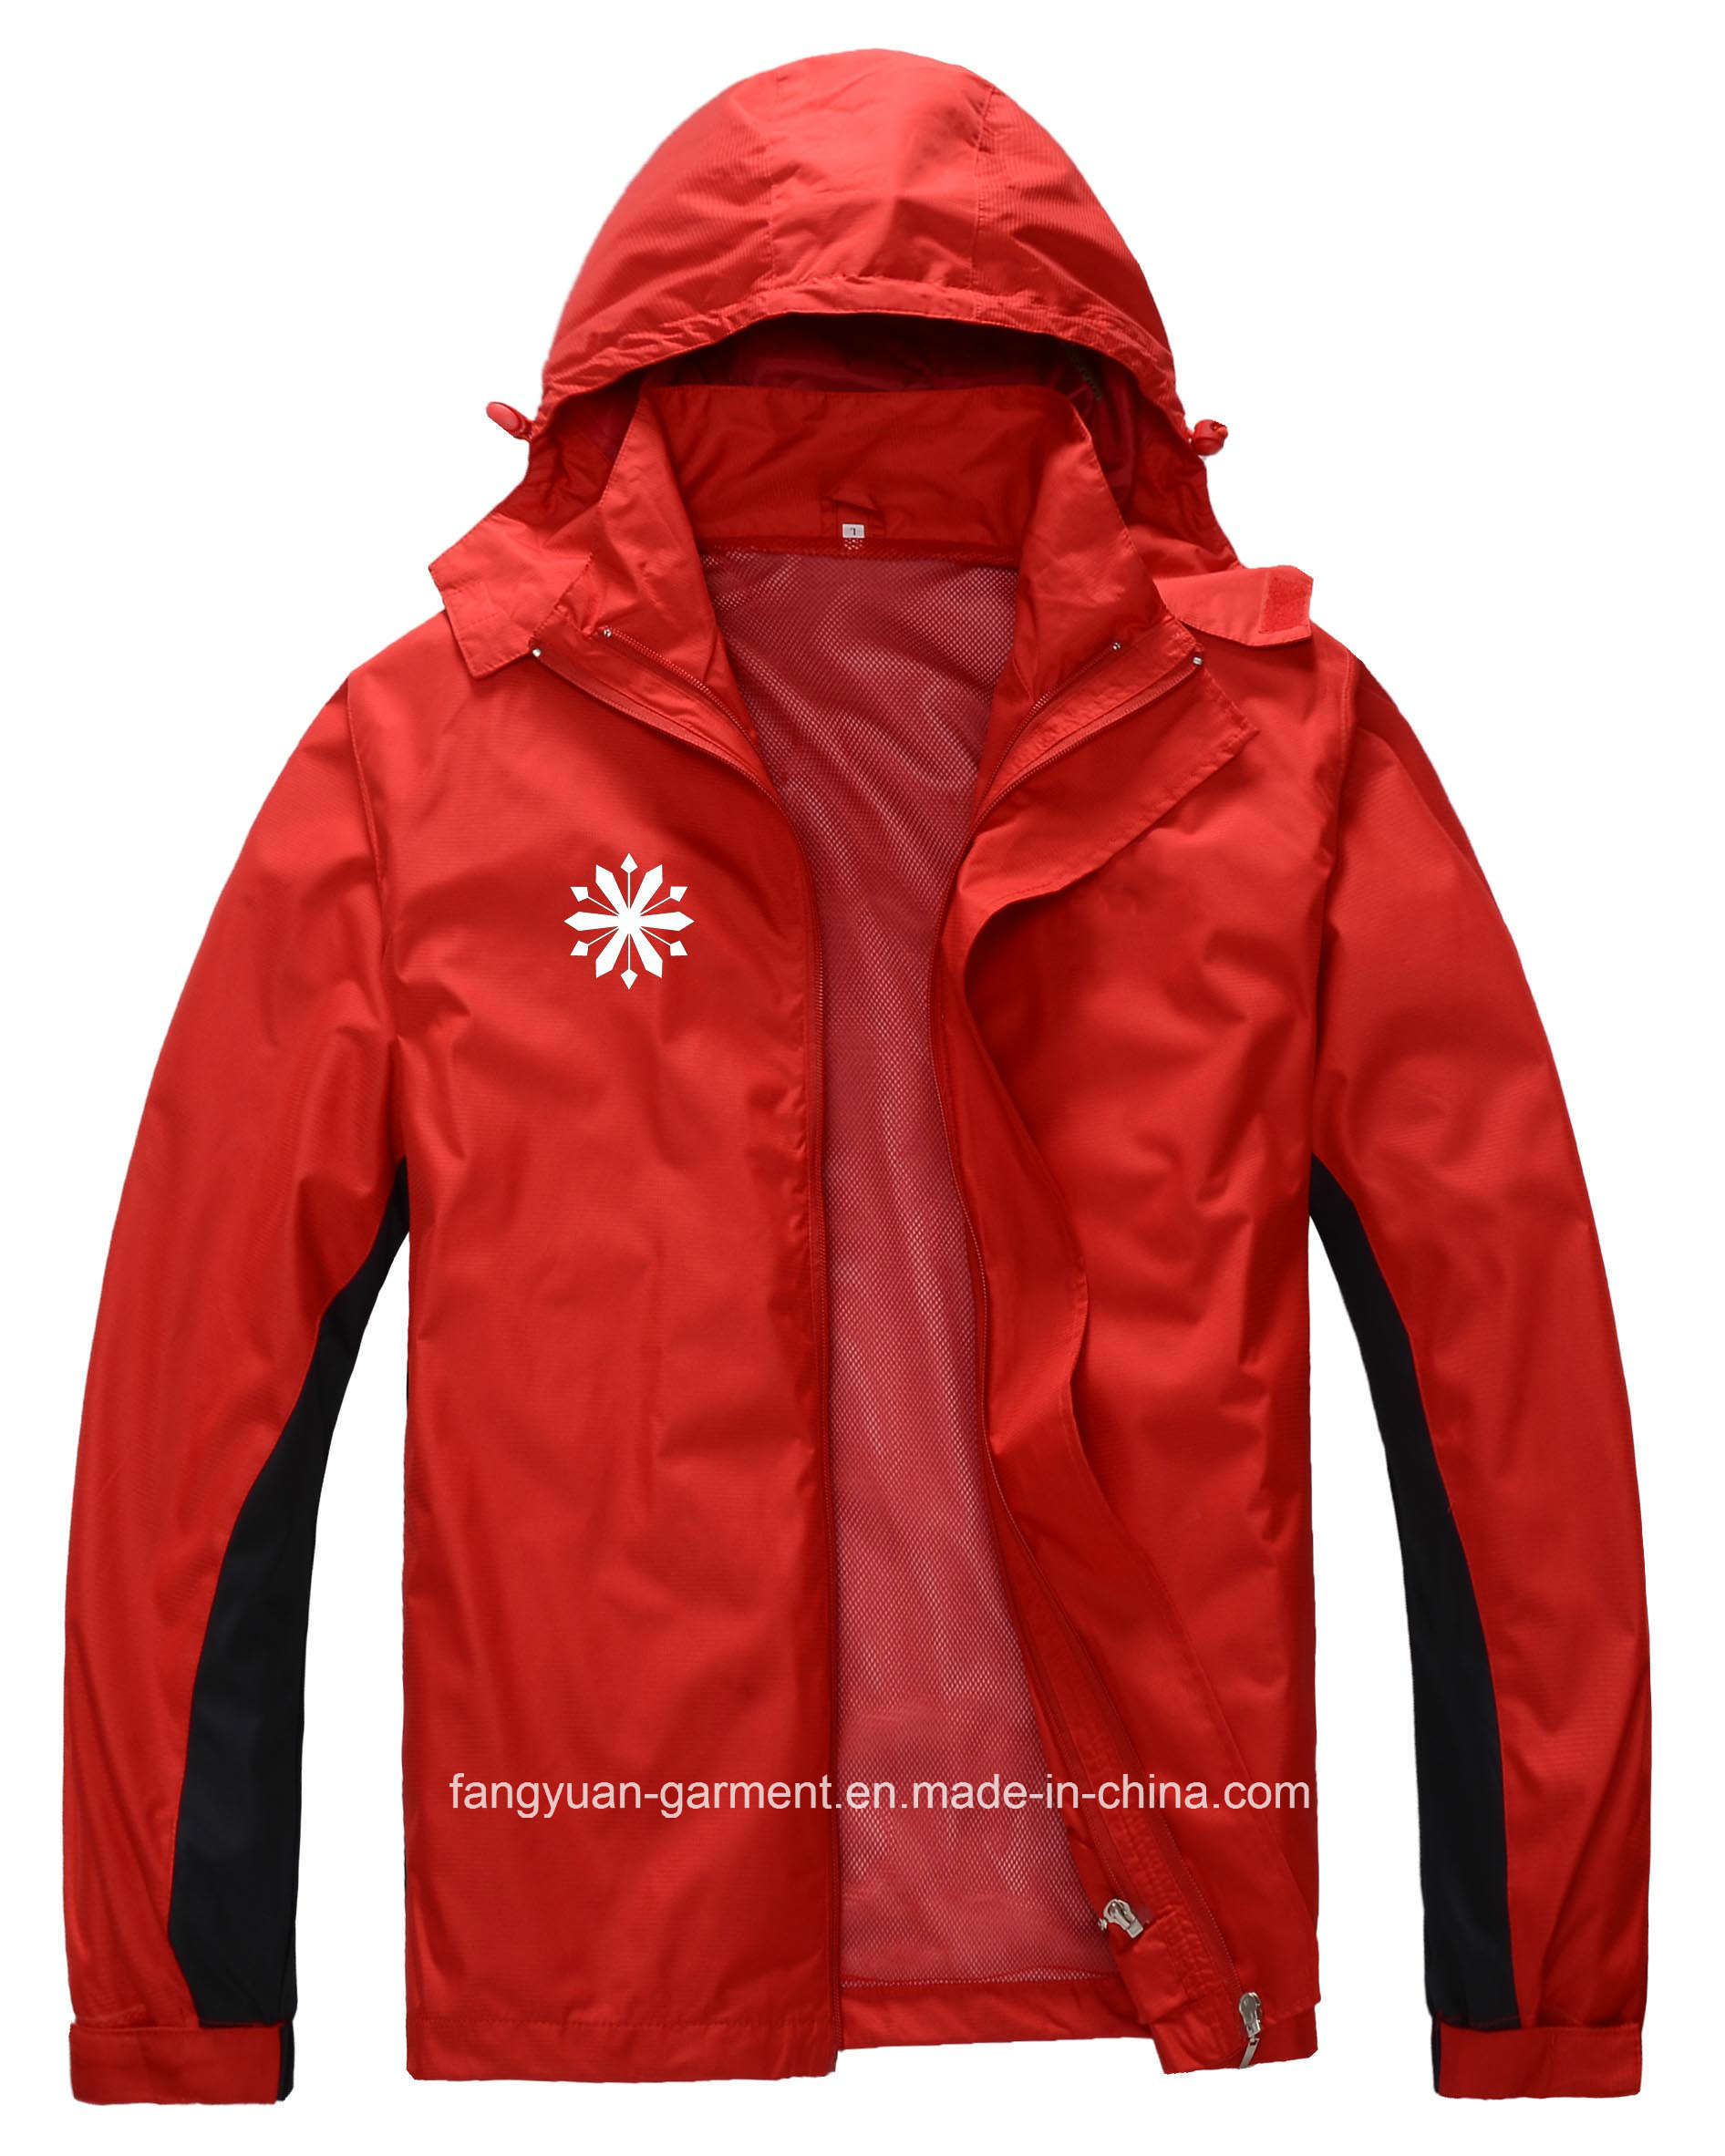 Chinese Red Style Windroof Jacket/Coat for Beer Factory, Good for Skiing, Diving, Skateboard, Ride